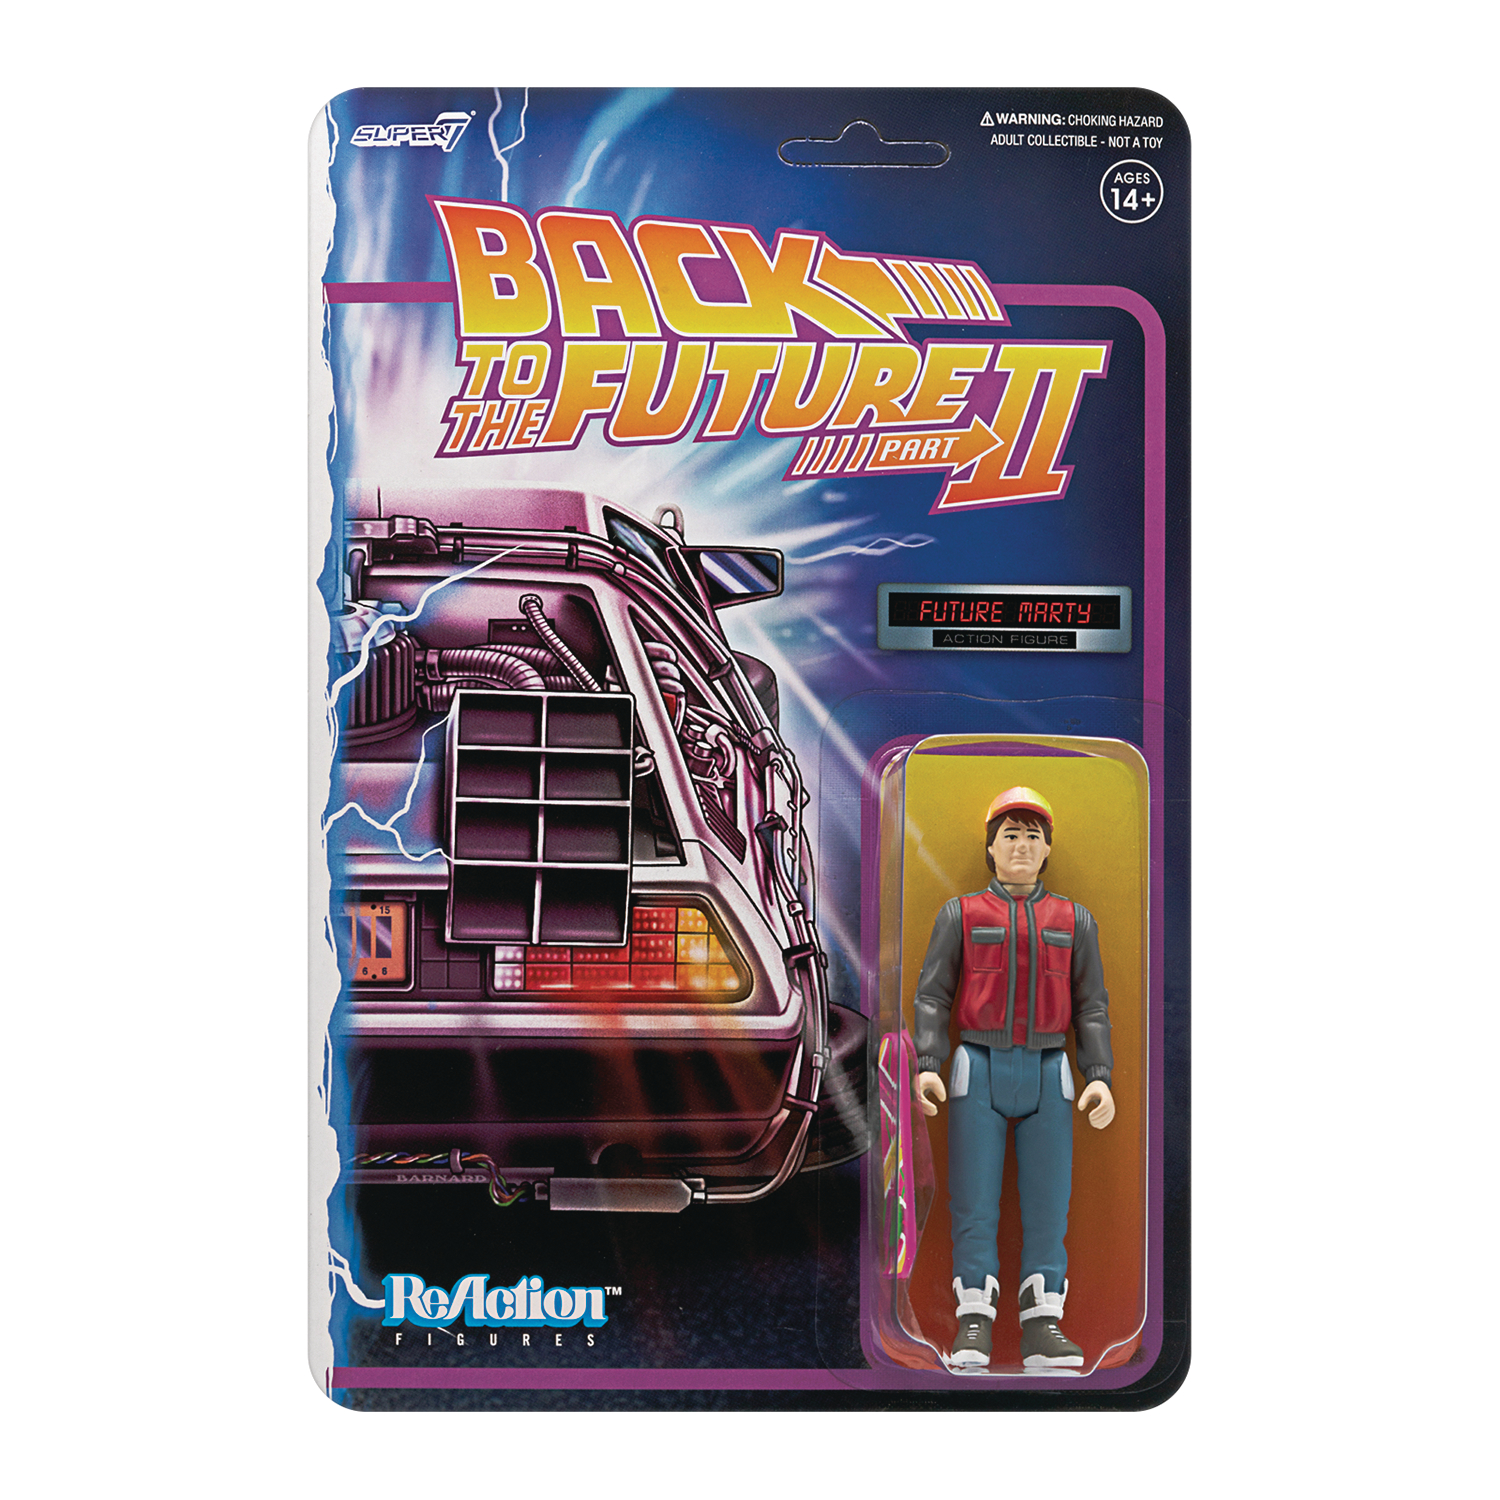 Back To the Future 2 Marty Mcfly Reaction Figure